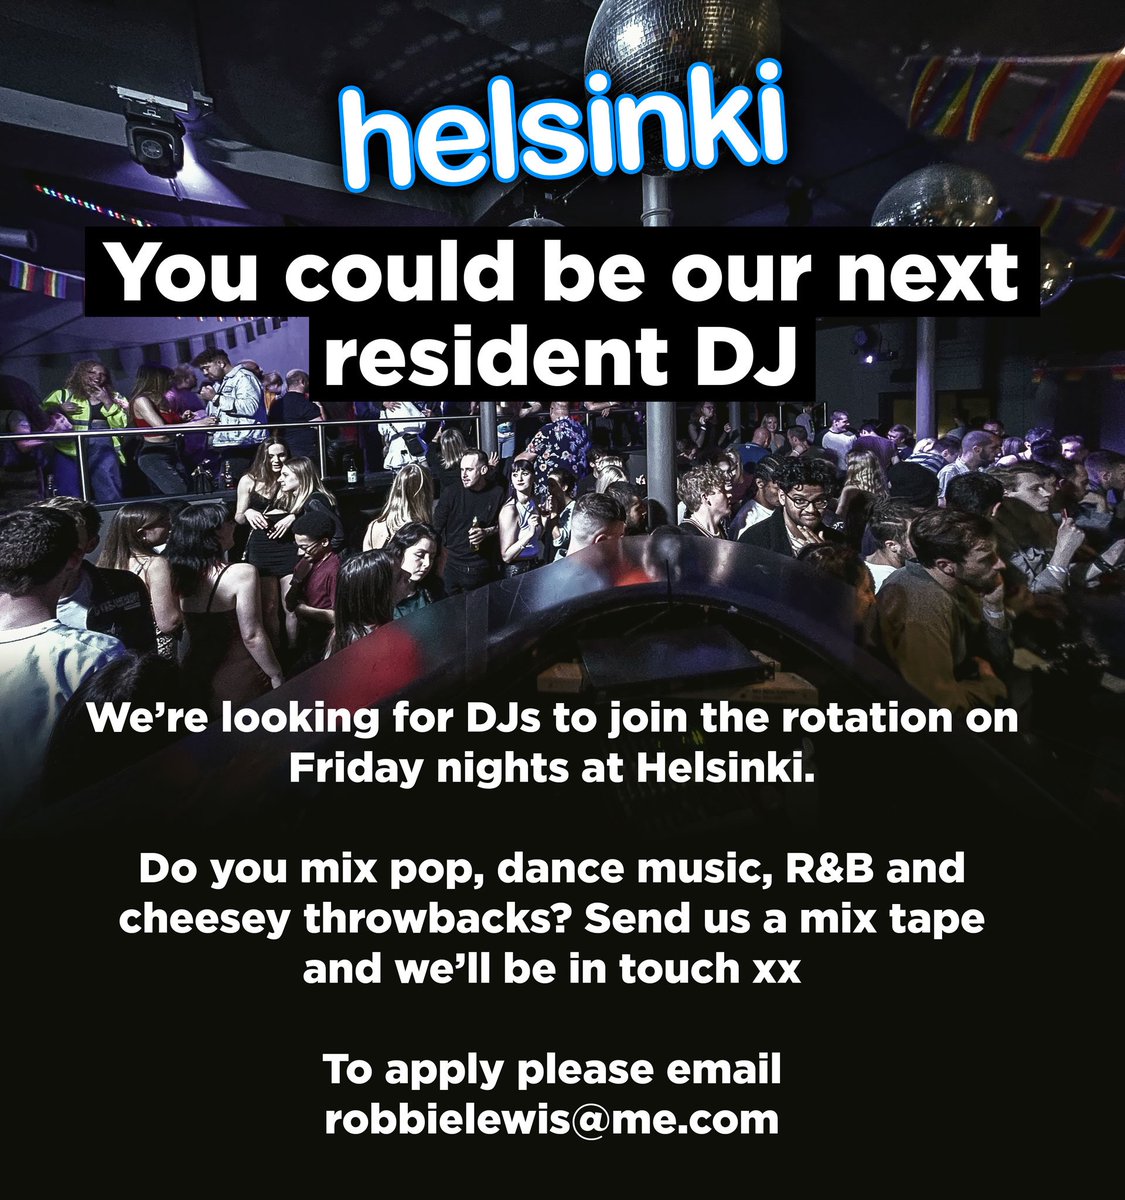 We’re looking to bring new DJs onto the rotation with me at Helsinki Leicester on Fridays. Open to established DJs or people who are learning. Fridays are quite busy and is a great place to get experience. Helsinki residents also get to perform at Pride. Email me a mix. https://t.co/AzLsokHmLQ